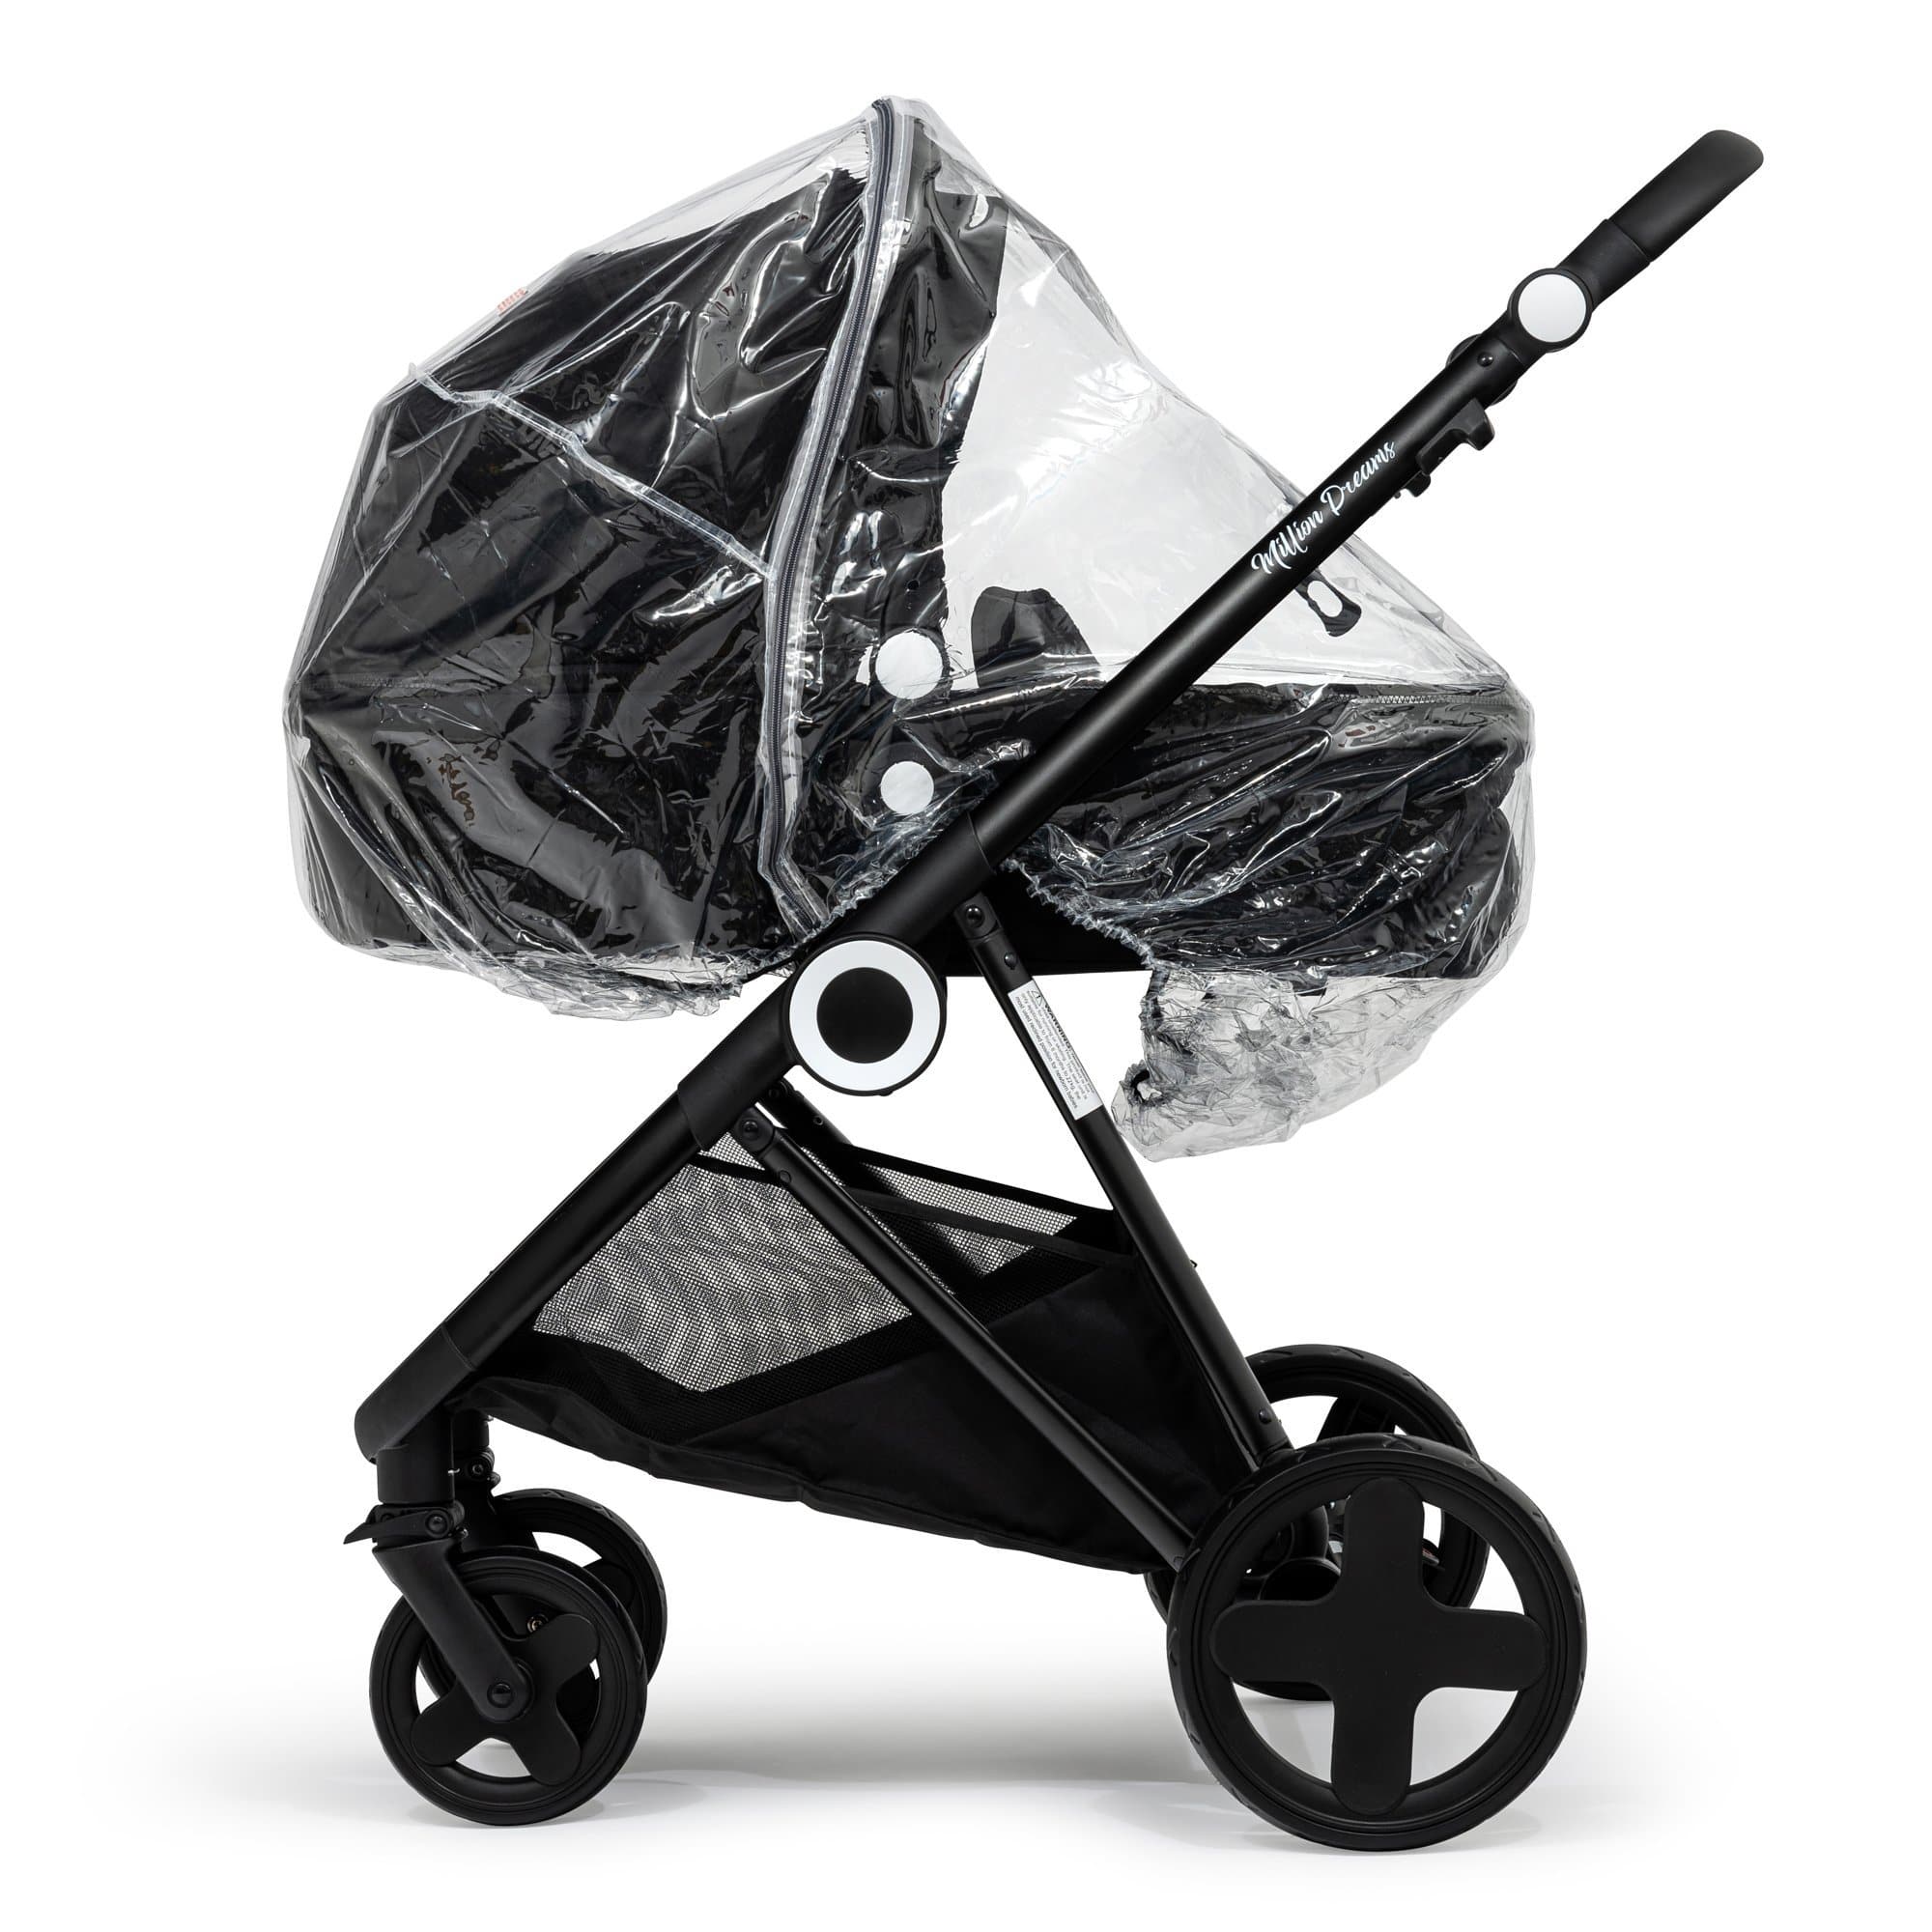 2 in 1 Rain Cover Compatible with Safety 1st - Fits All Models - For Your Little One